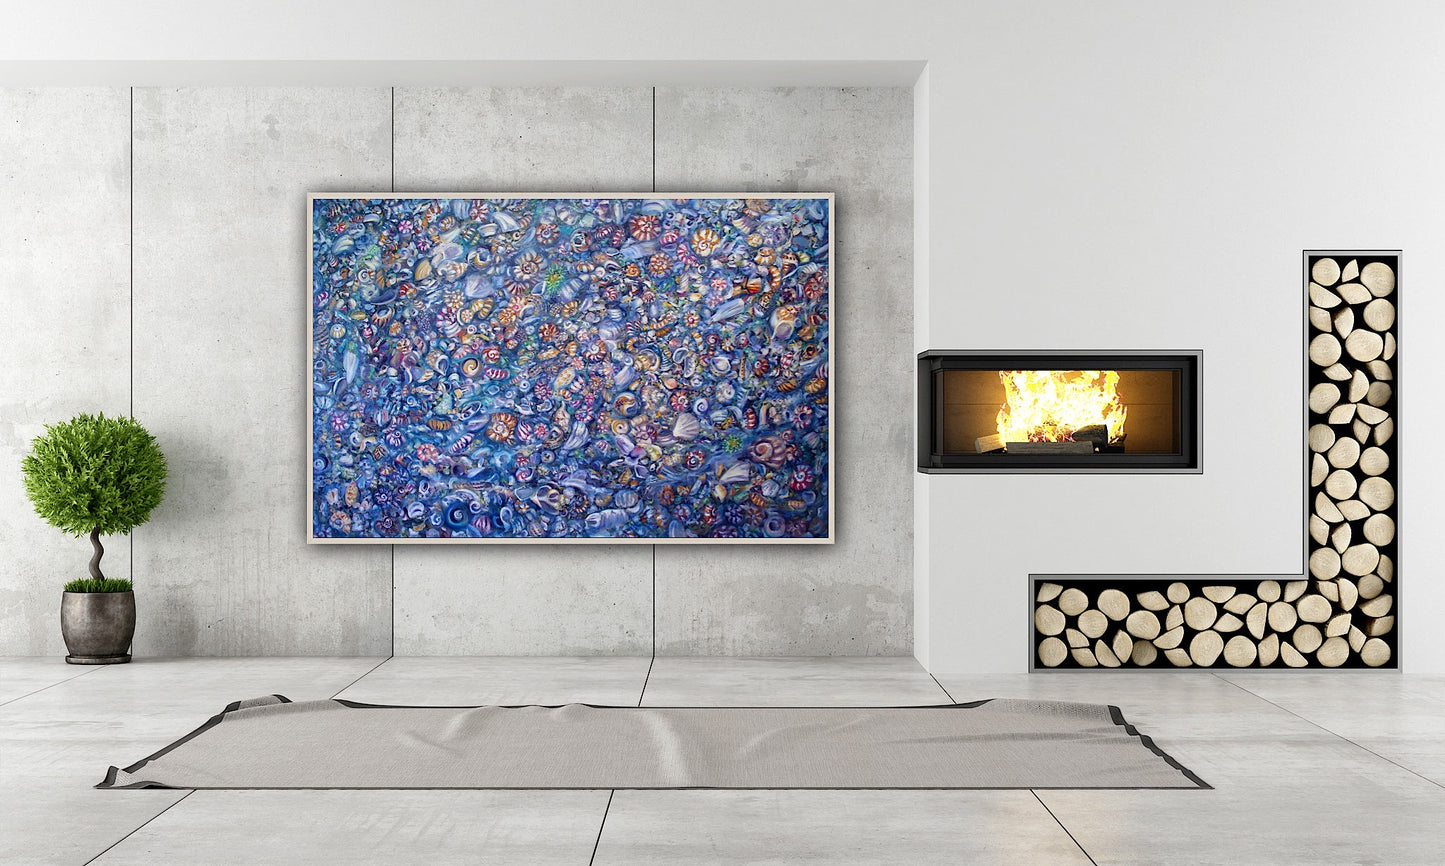 Tide Pool IV, An Original 40" x 60" Highly Detailed Seashell Oil Painting On Canvas